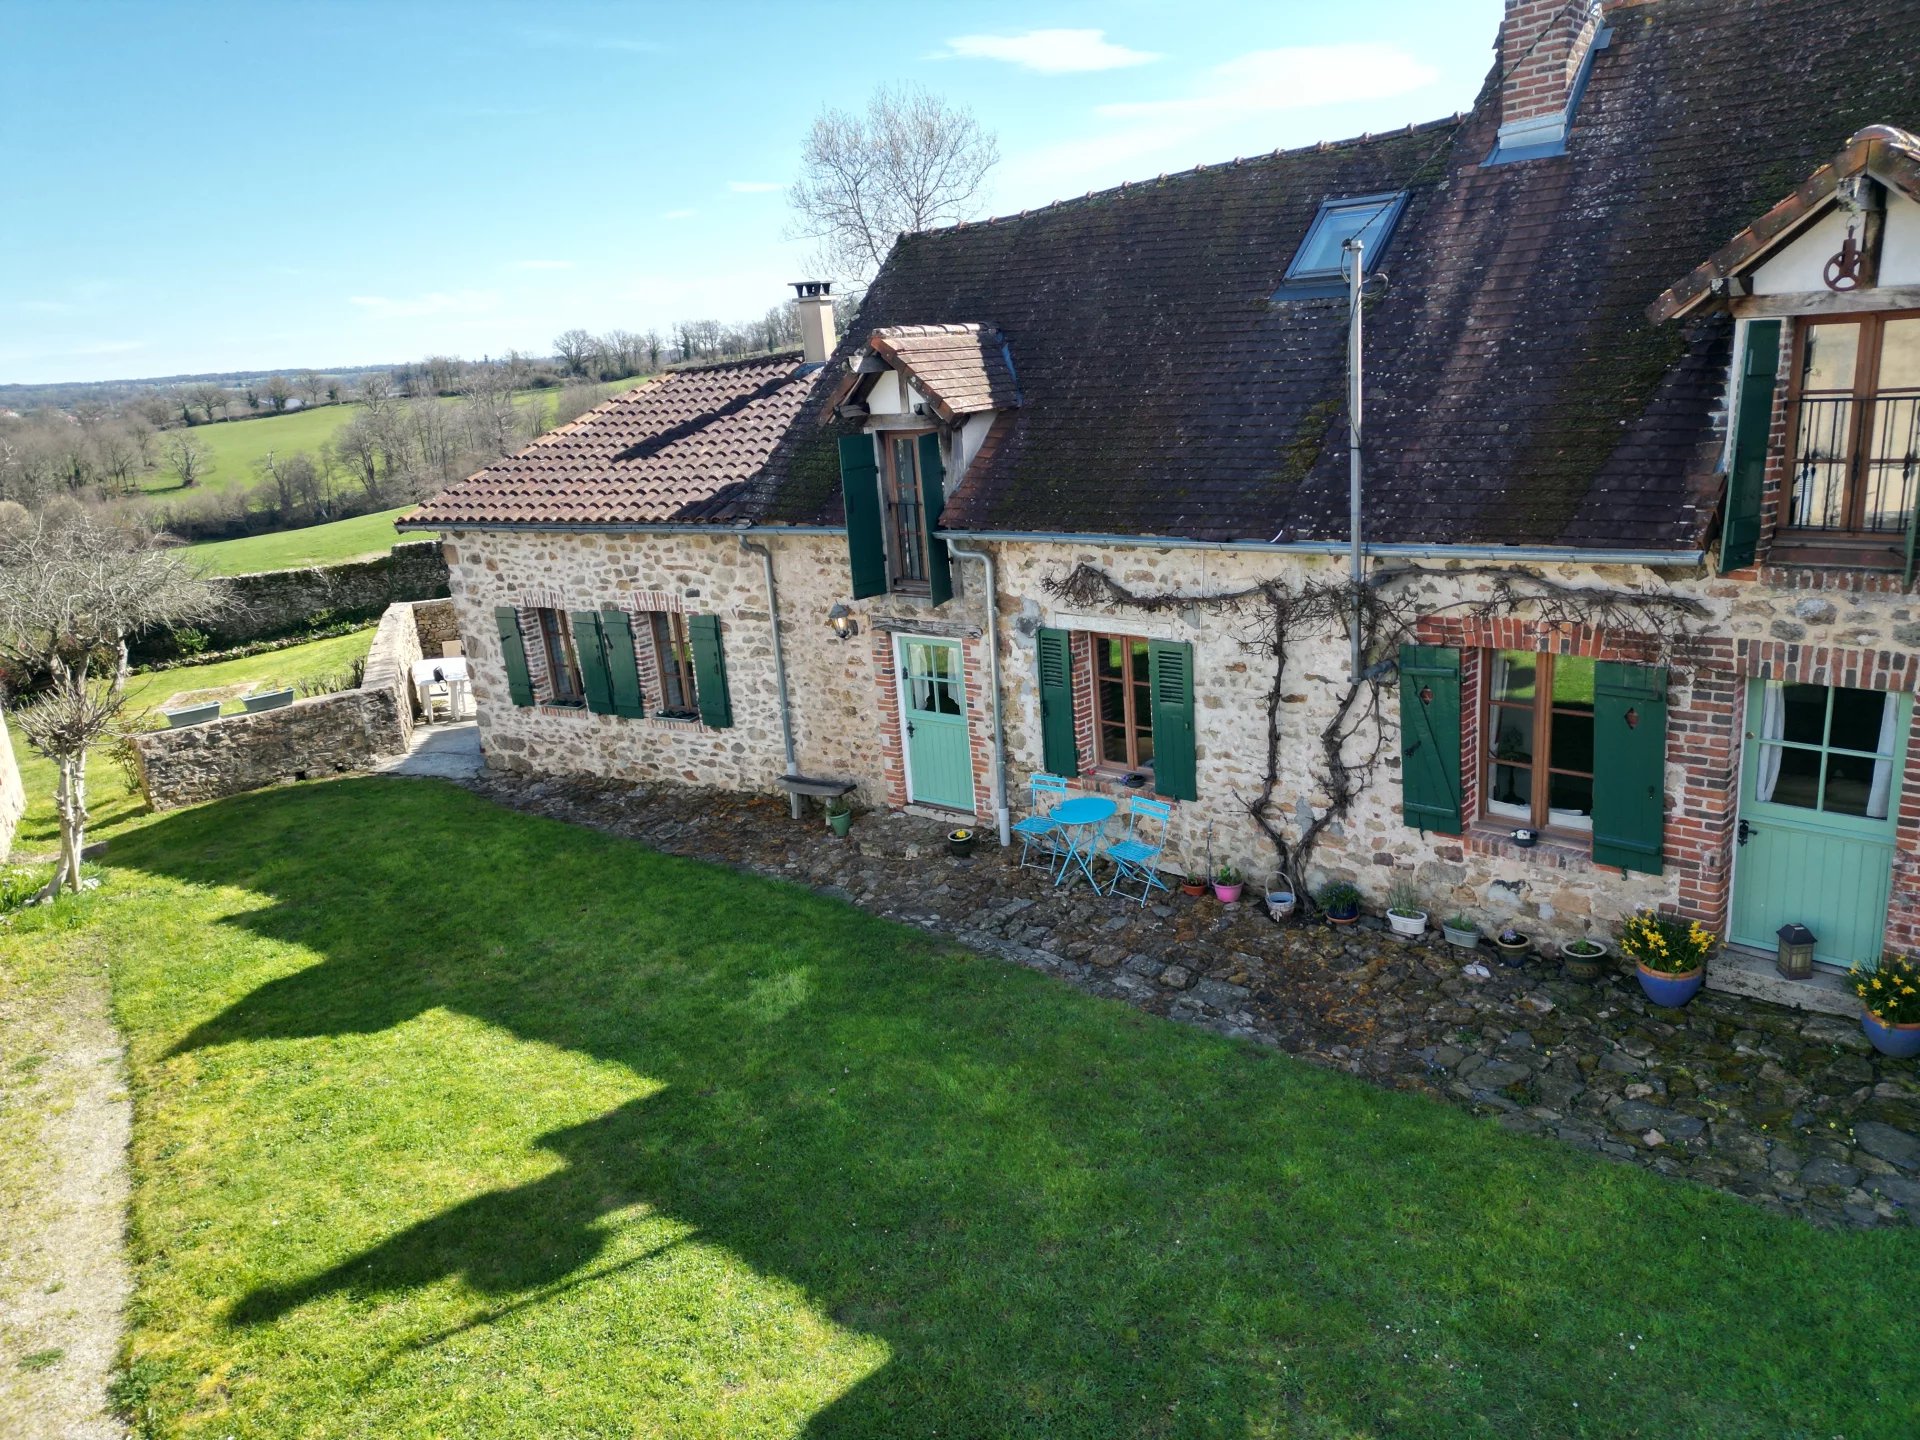 Have your own little hamlet, many options with this estate of renovated houses